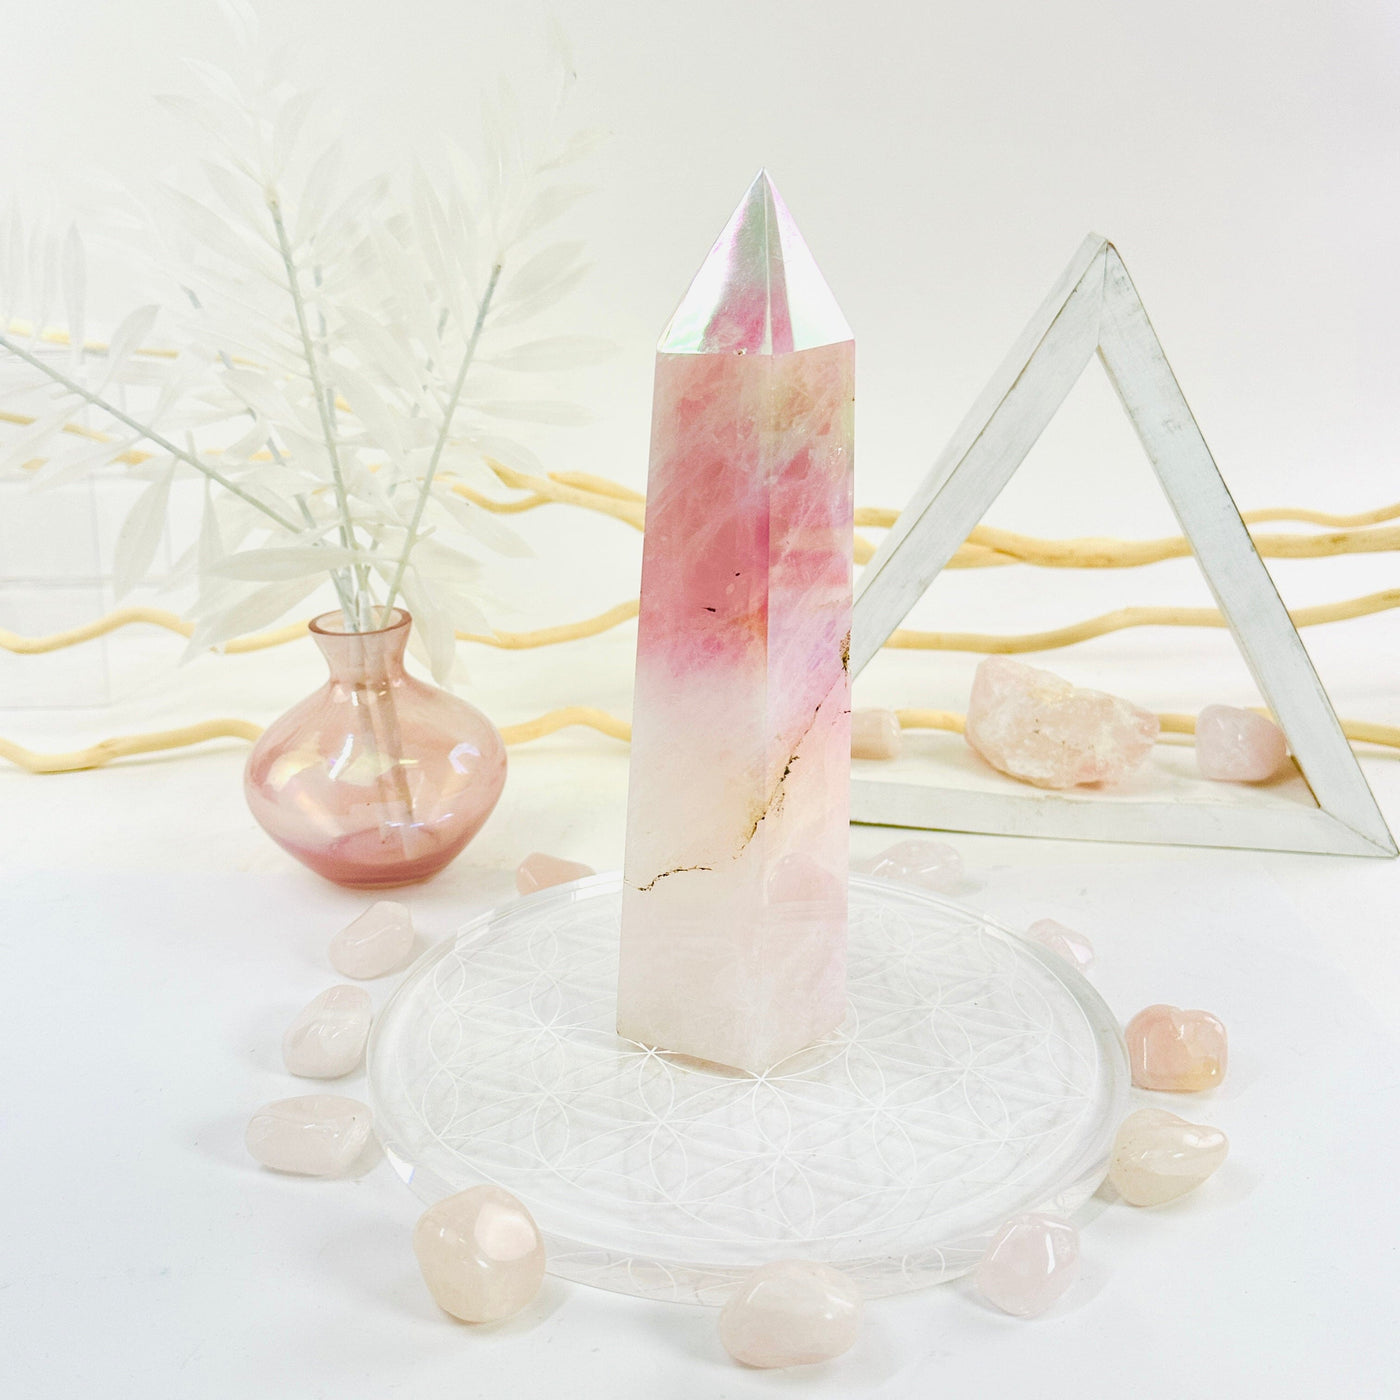 Angel Aura Rose Quartz Tower with Natural Inclusions side view